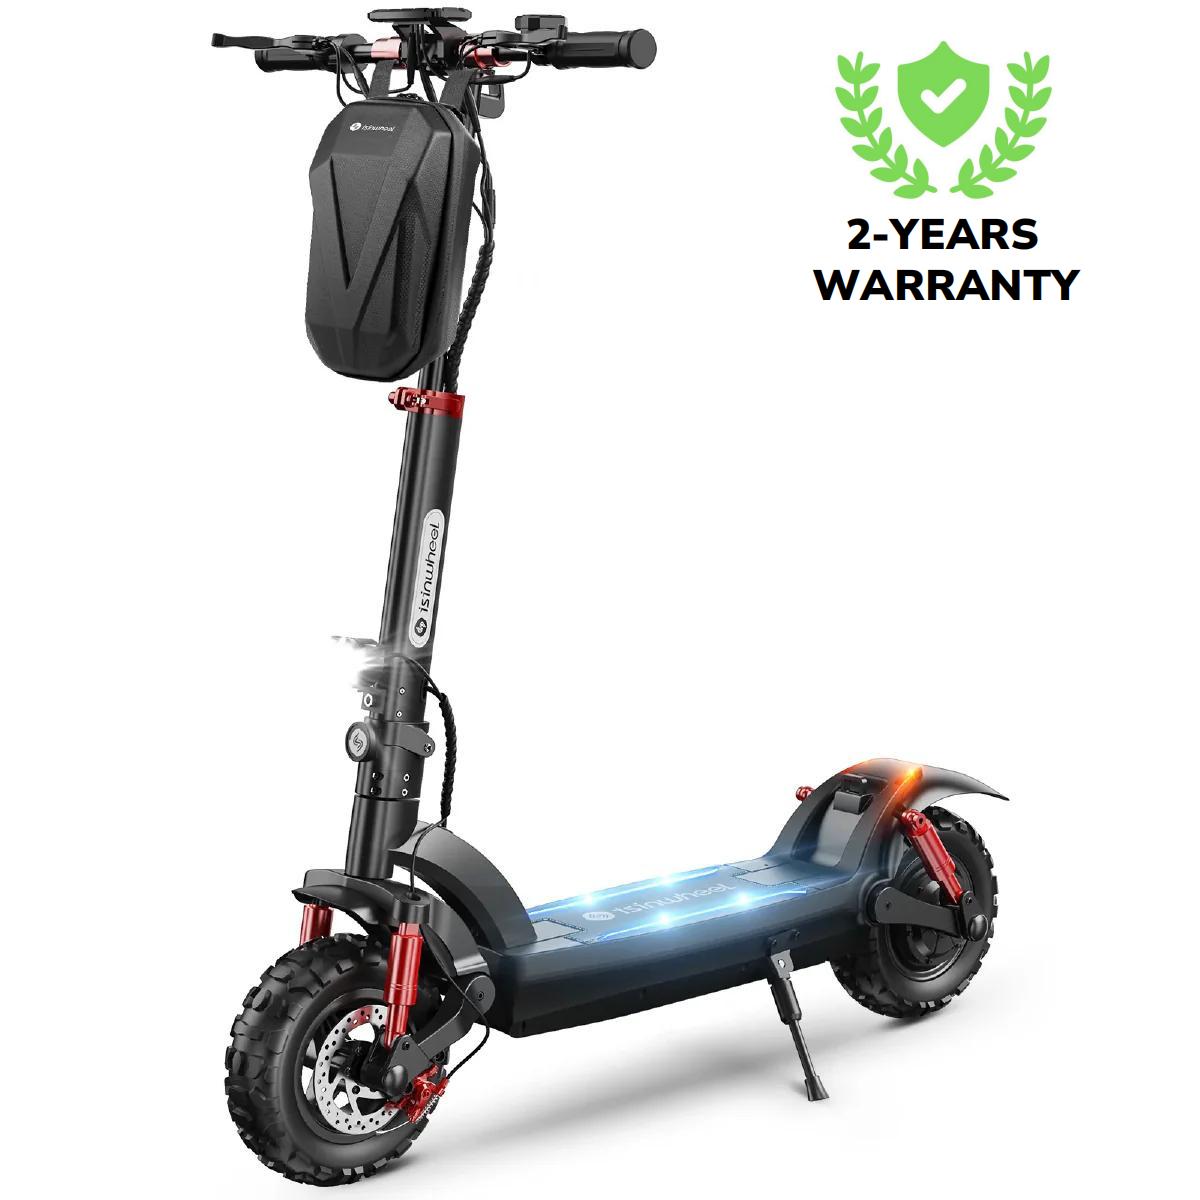 isinwheel® R3 Off Road Electric Scooter 800W